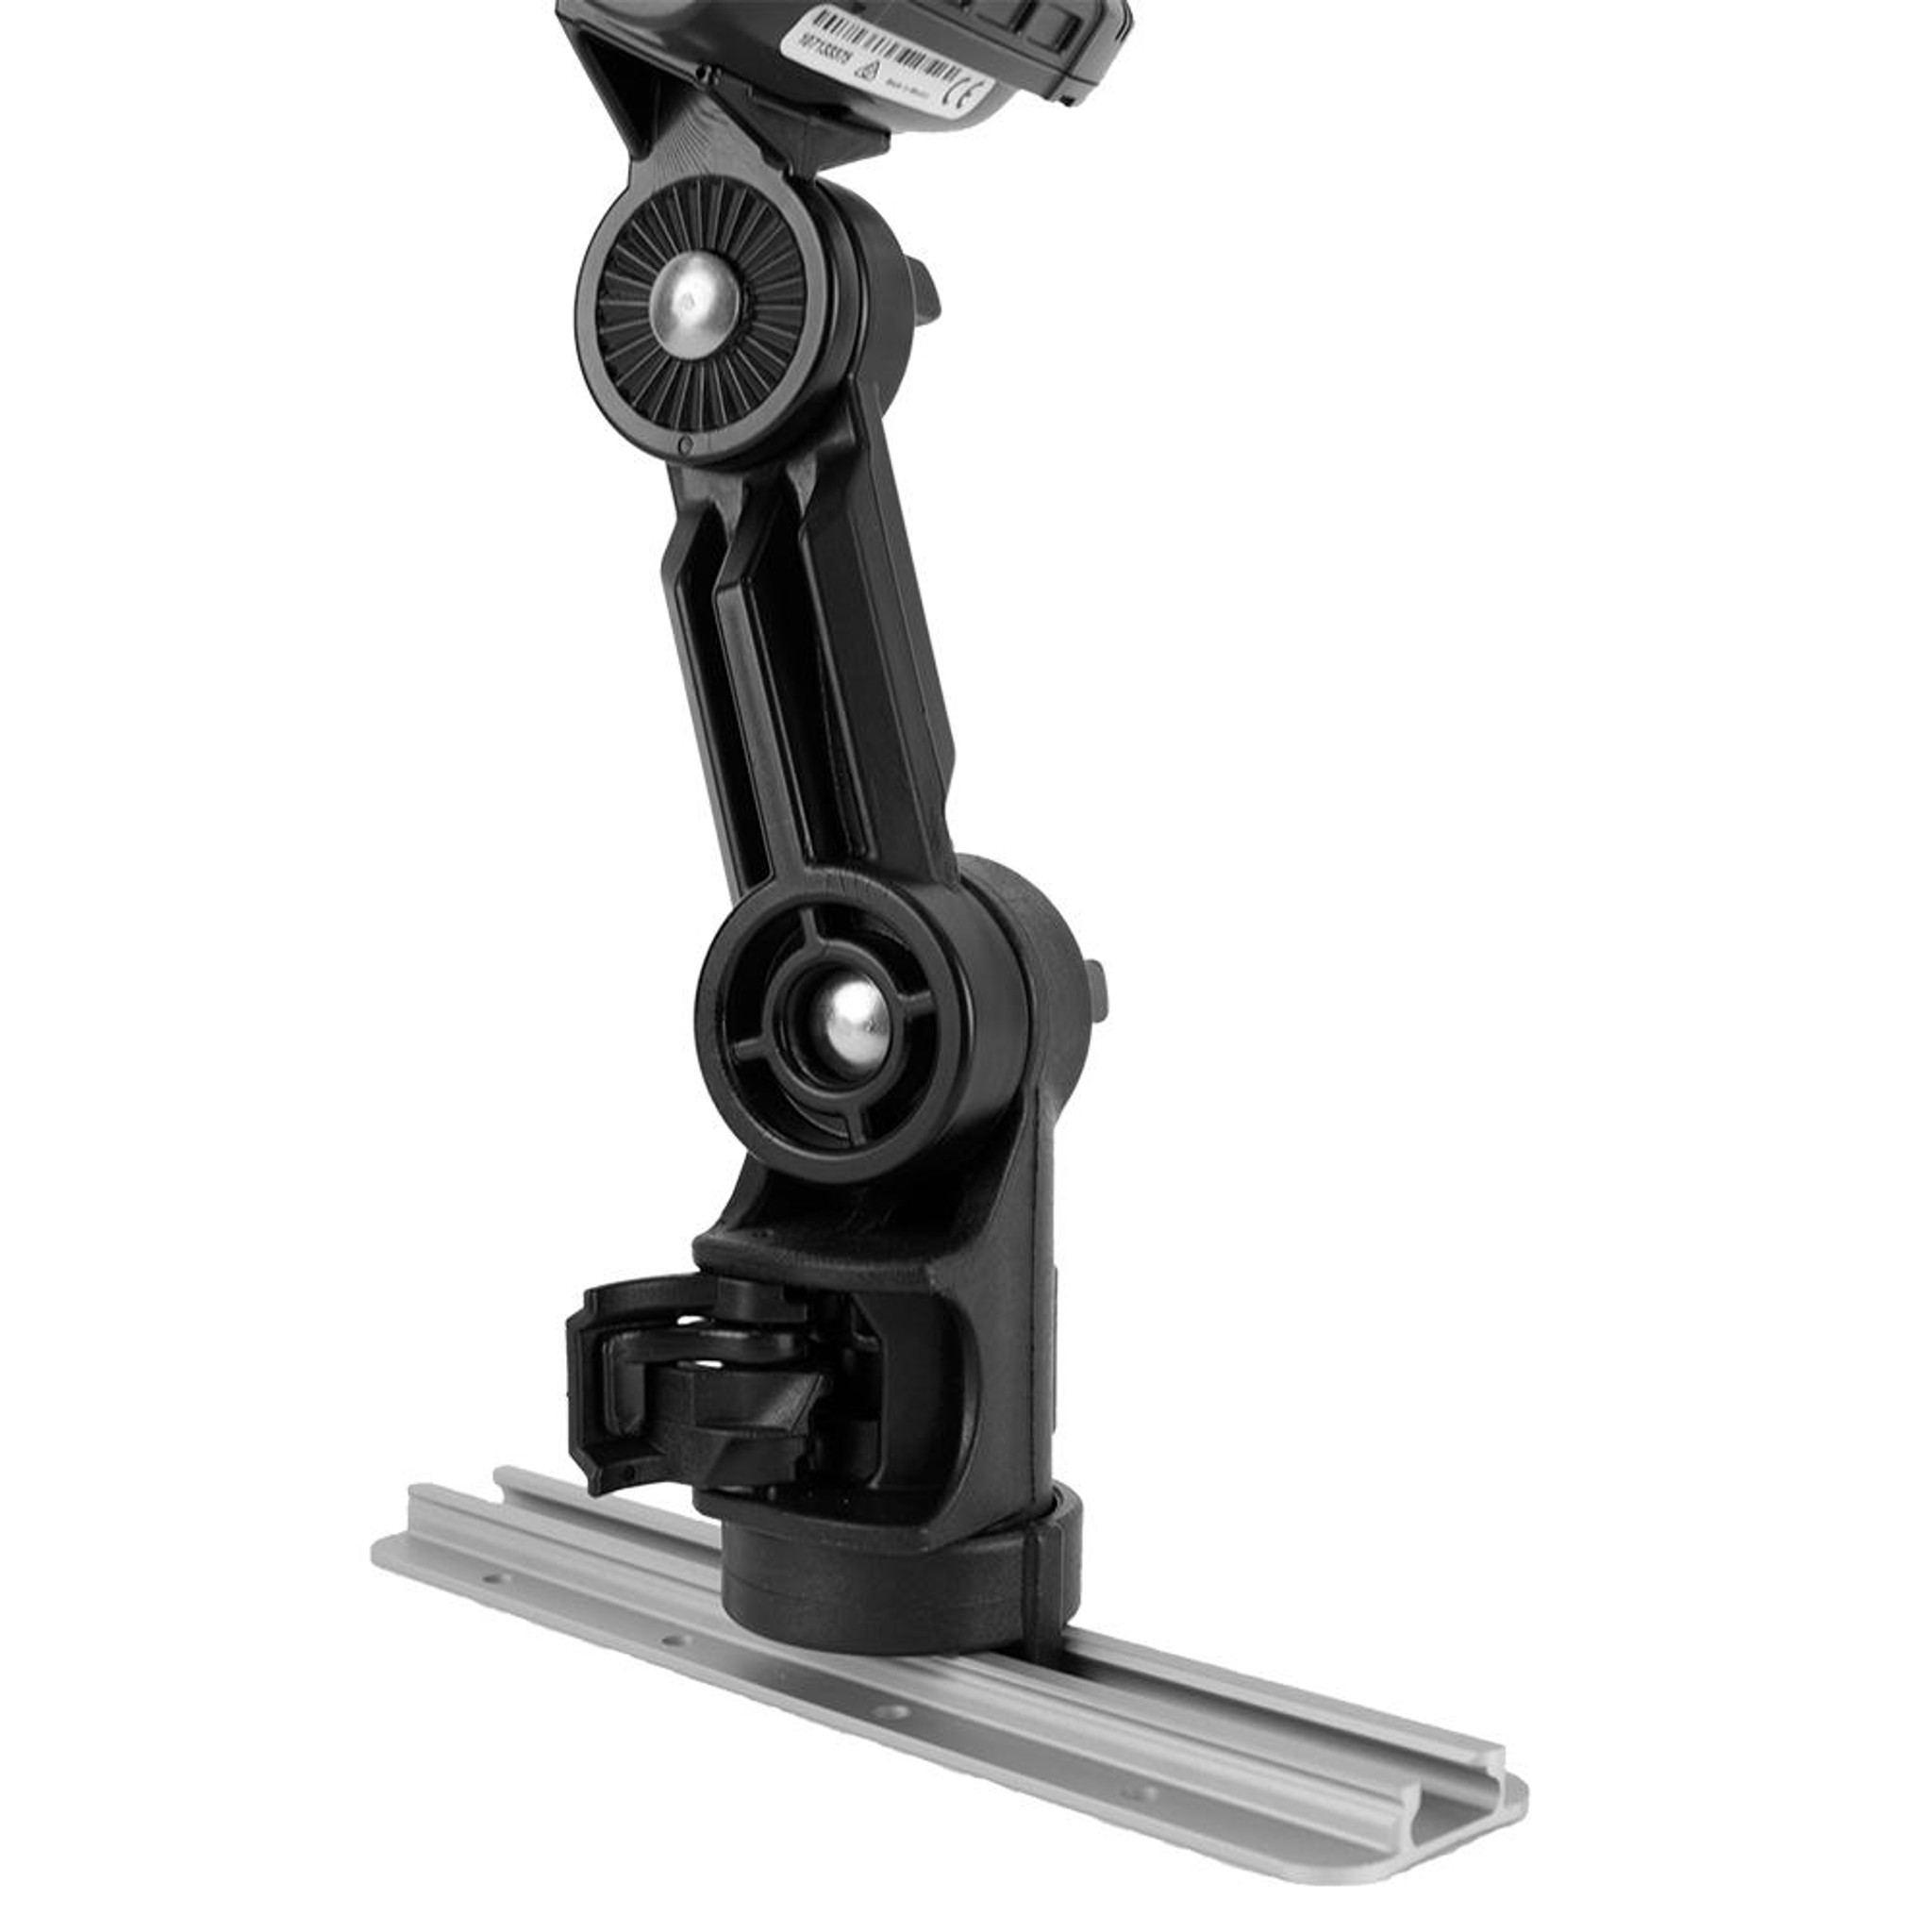  Kayak/SUP Transducer Mounting Arm with Marine Electronics Fish  Finder Base Adapter Ball Mount, Compatible with Scotty, Lowrance, Garmin Fish  Finder : Electronics